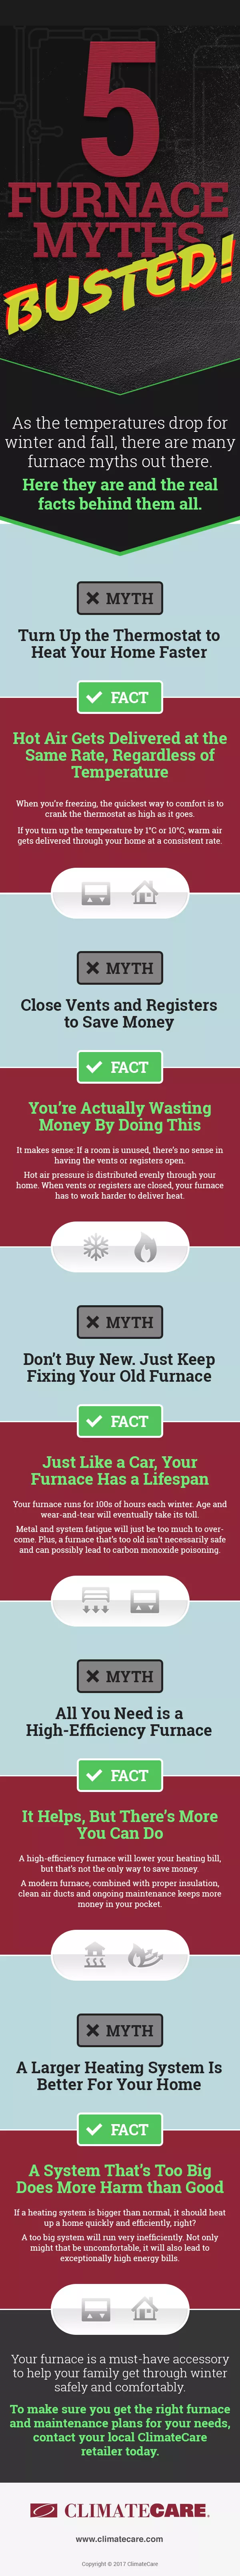 Furnace myths busted infographic